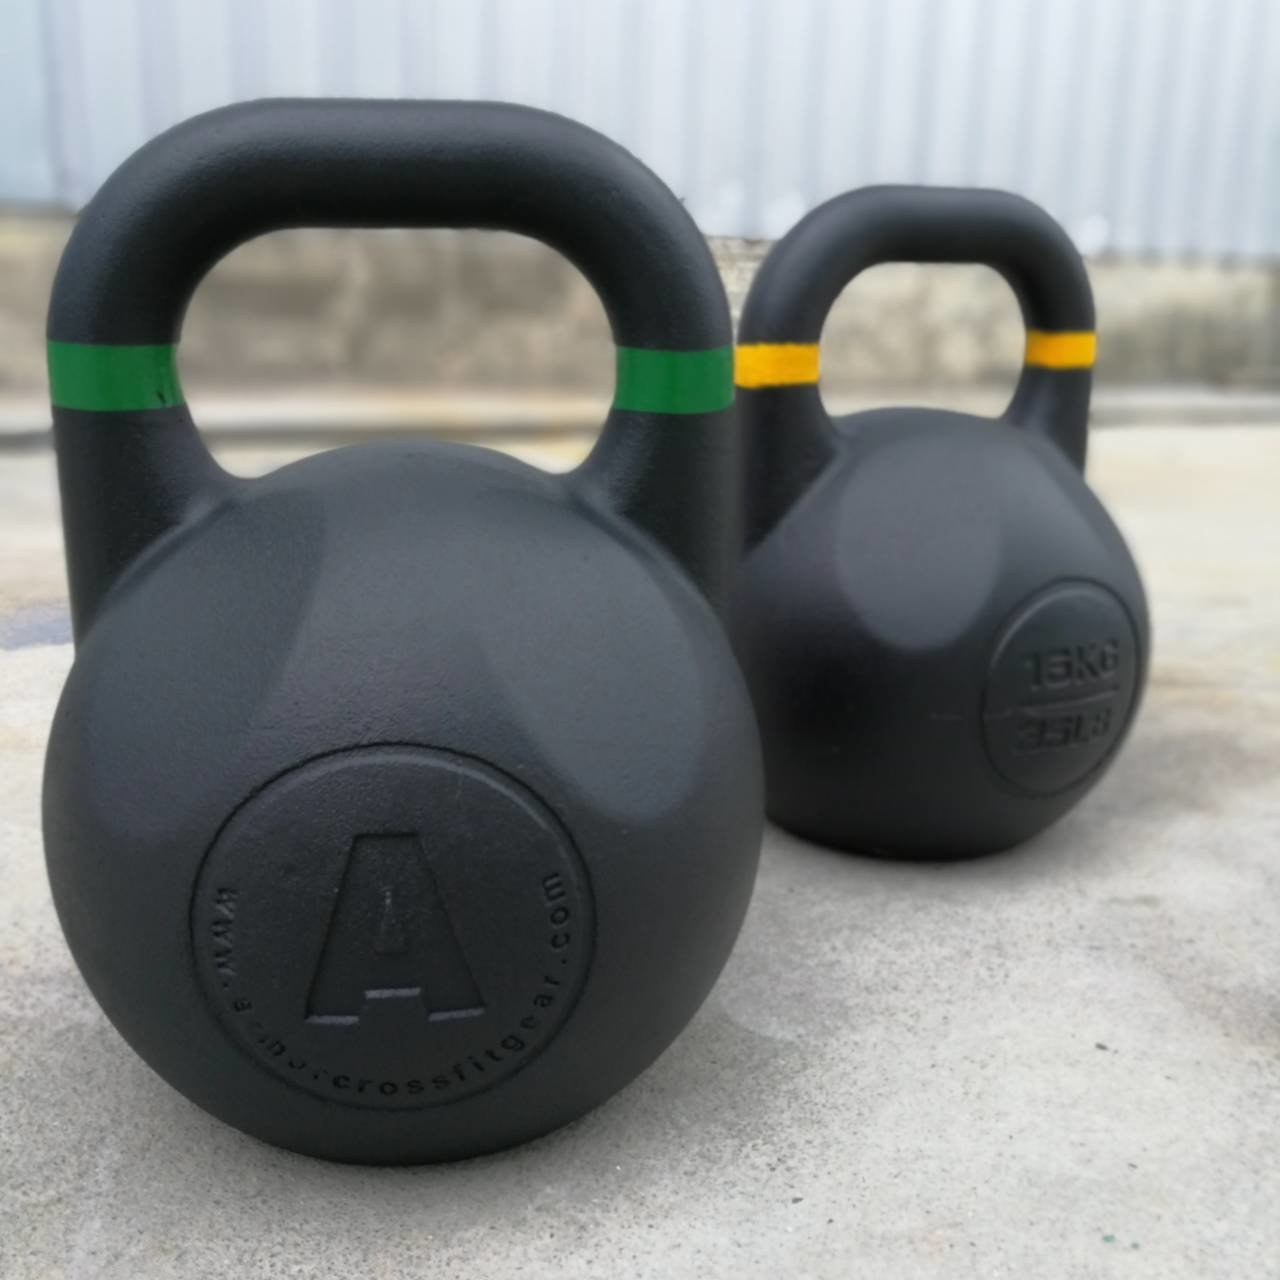 ARMOR COMPETITION KETTLEBELLS